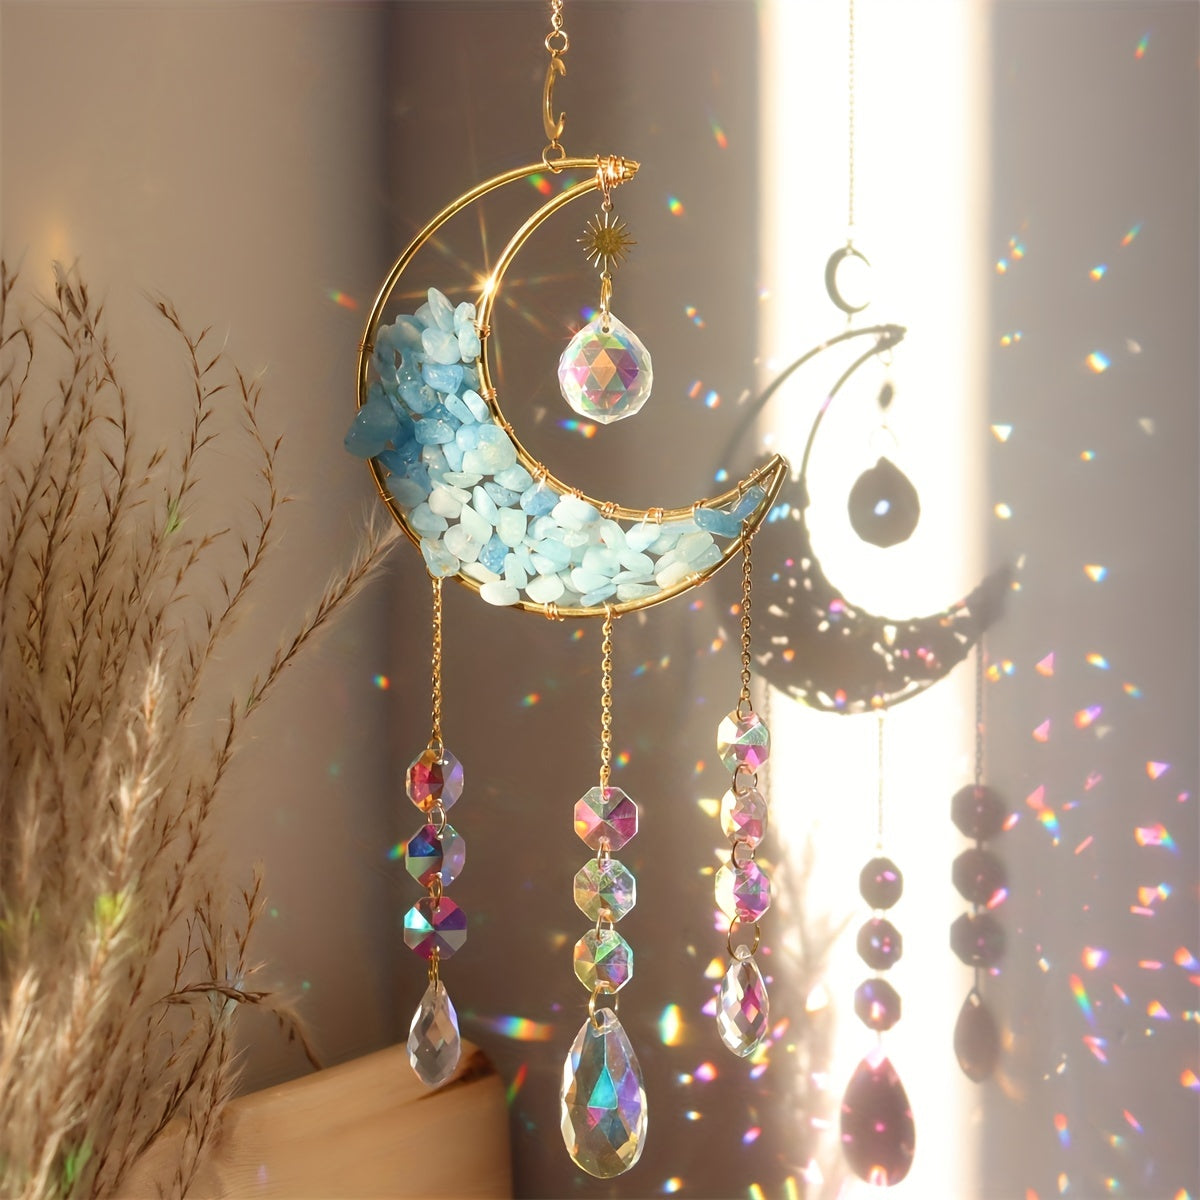 1pc Rainbow Maker Crystal Suncatcher - Enhance Your Home Decor with Aquamarine, Amethyst, and Obsidian - Perfect for Garden, Yard, Bedroom, Balcony, and Patio